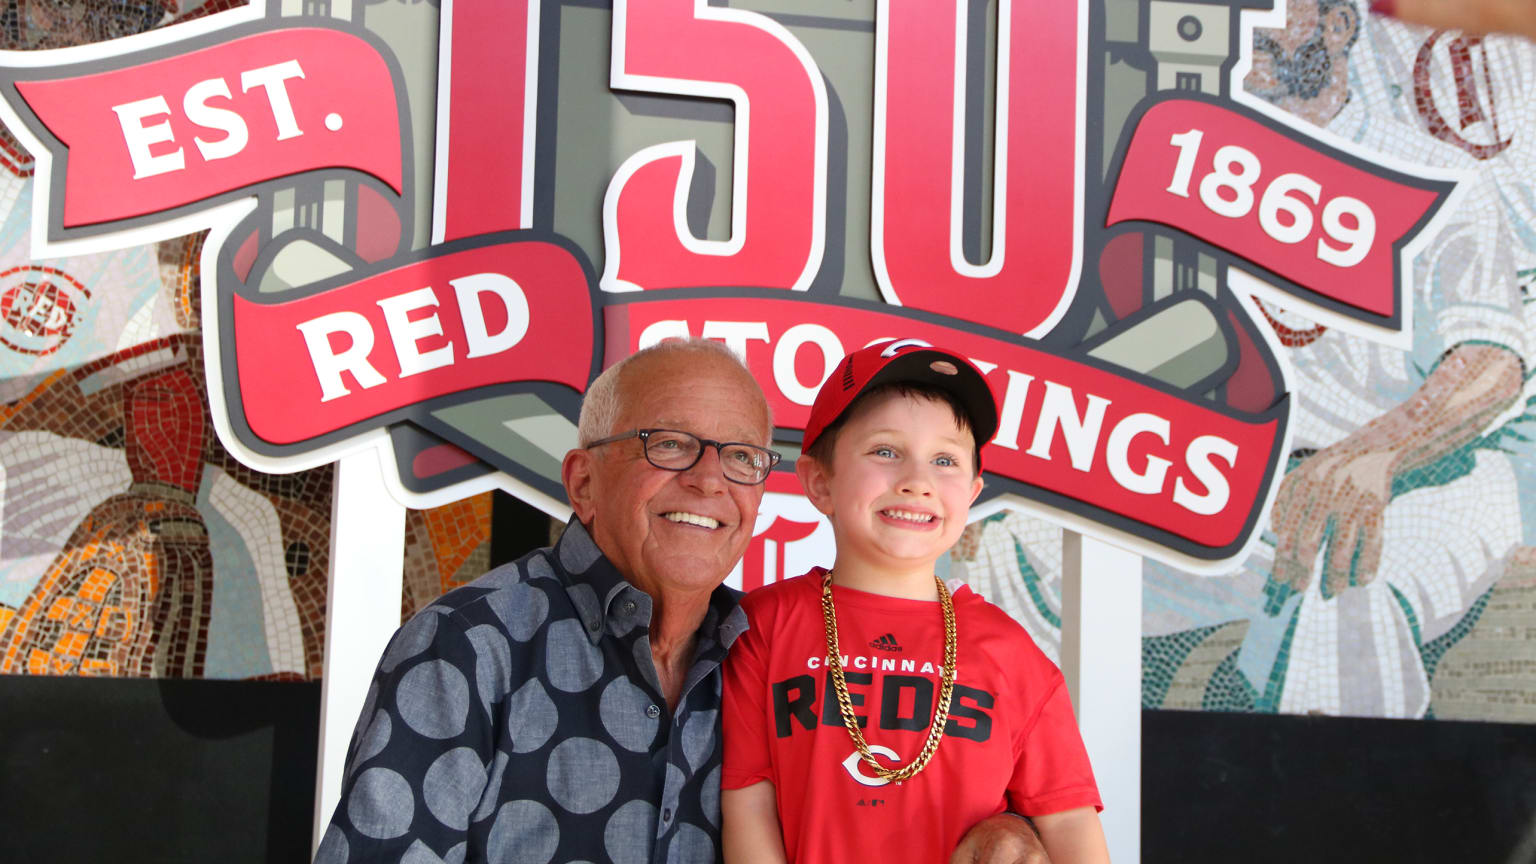 Reds plan a party like no other for 150th year